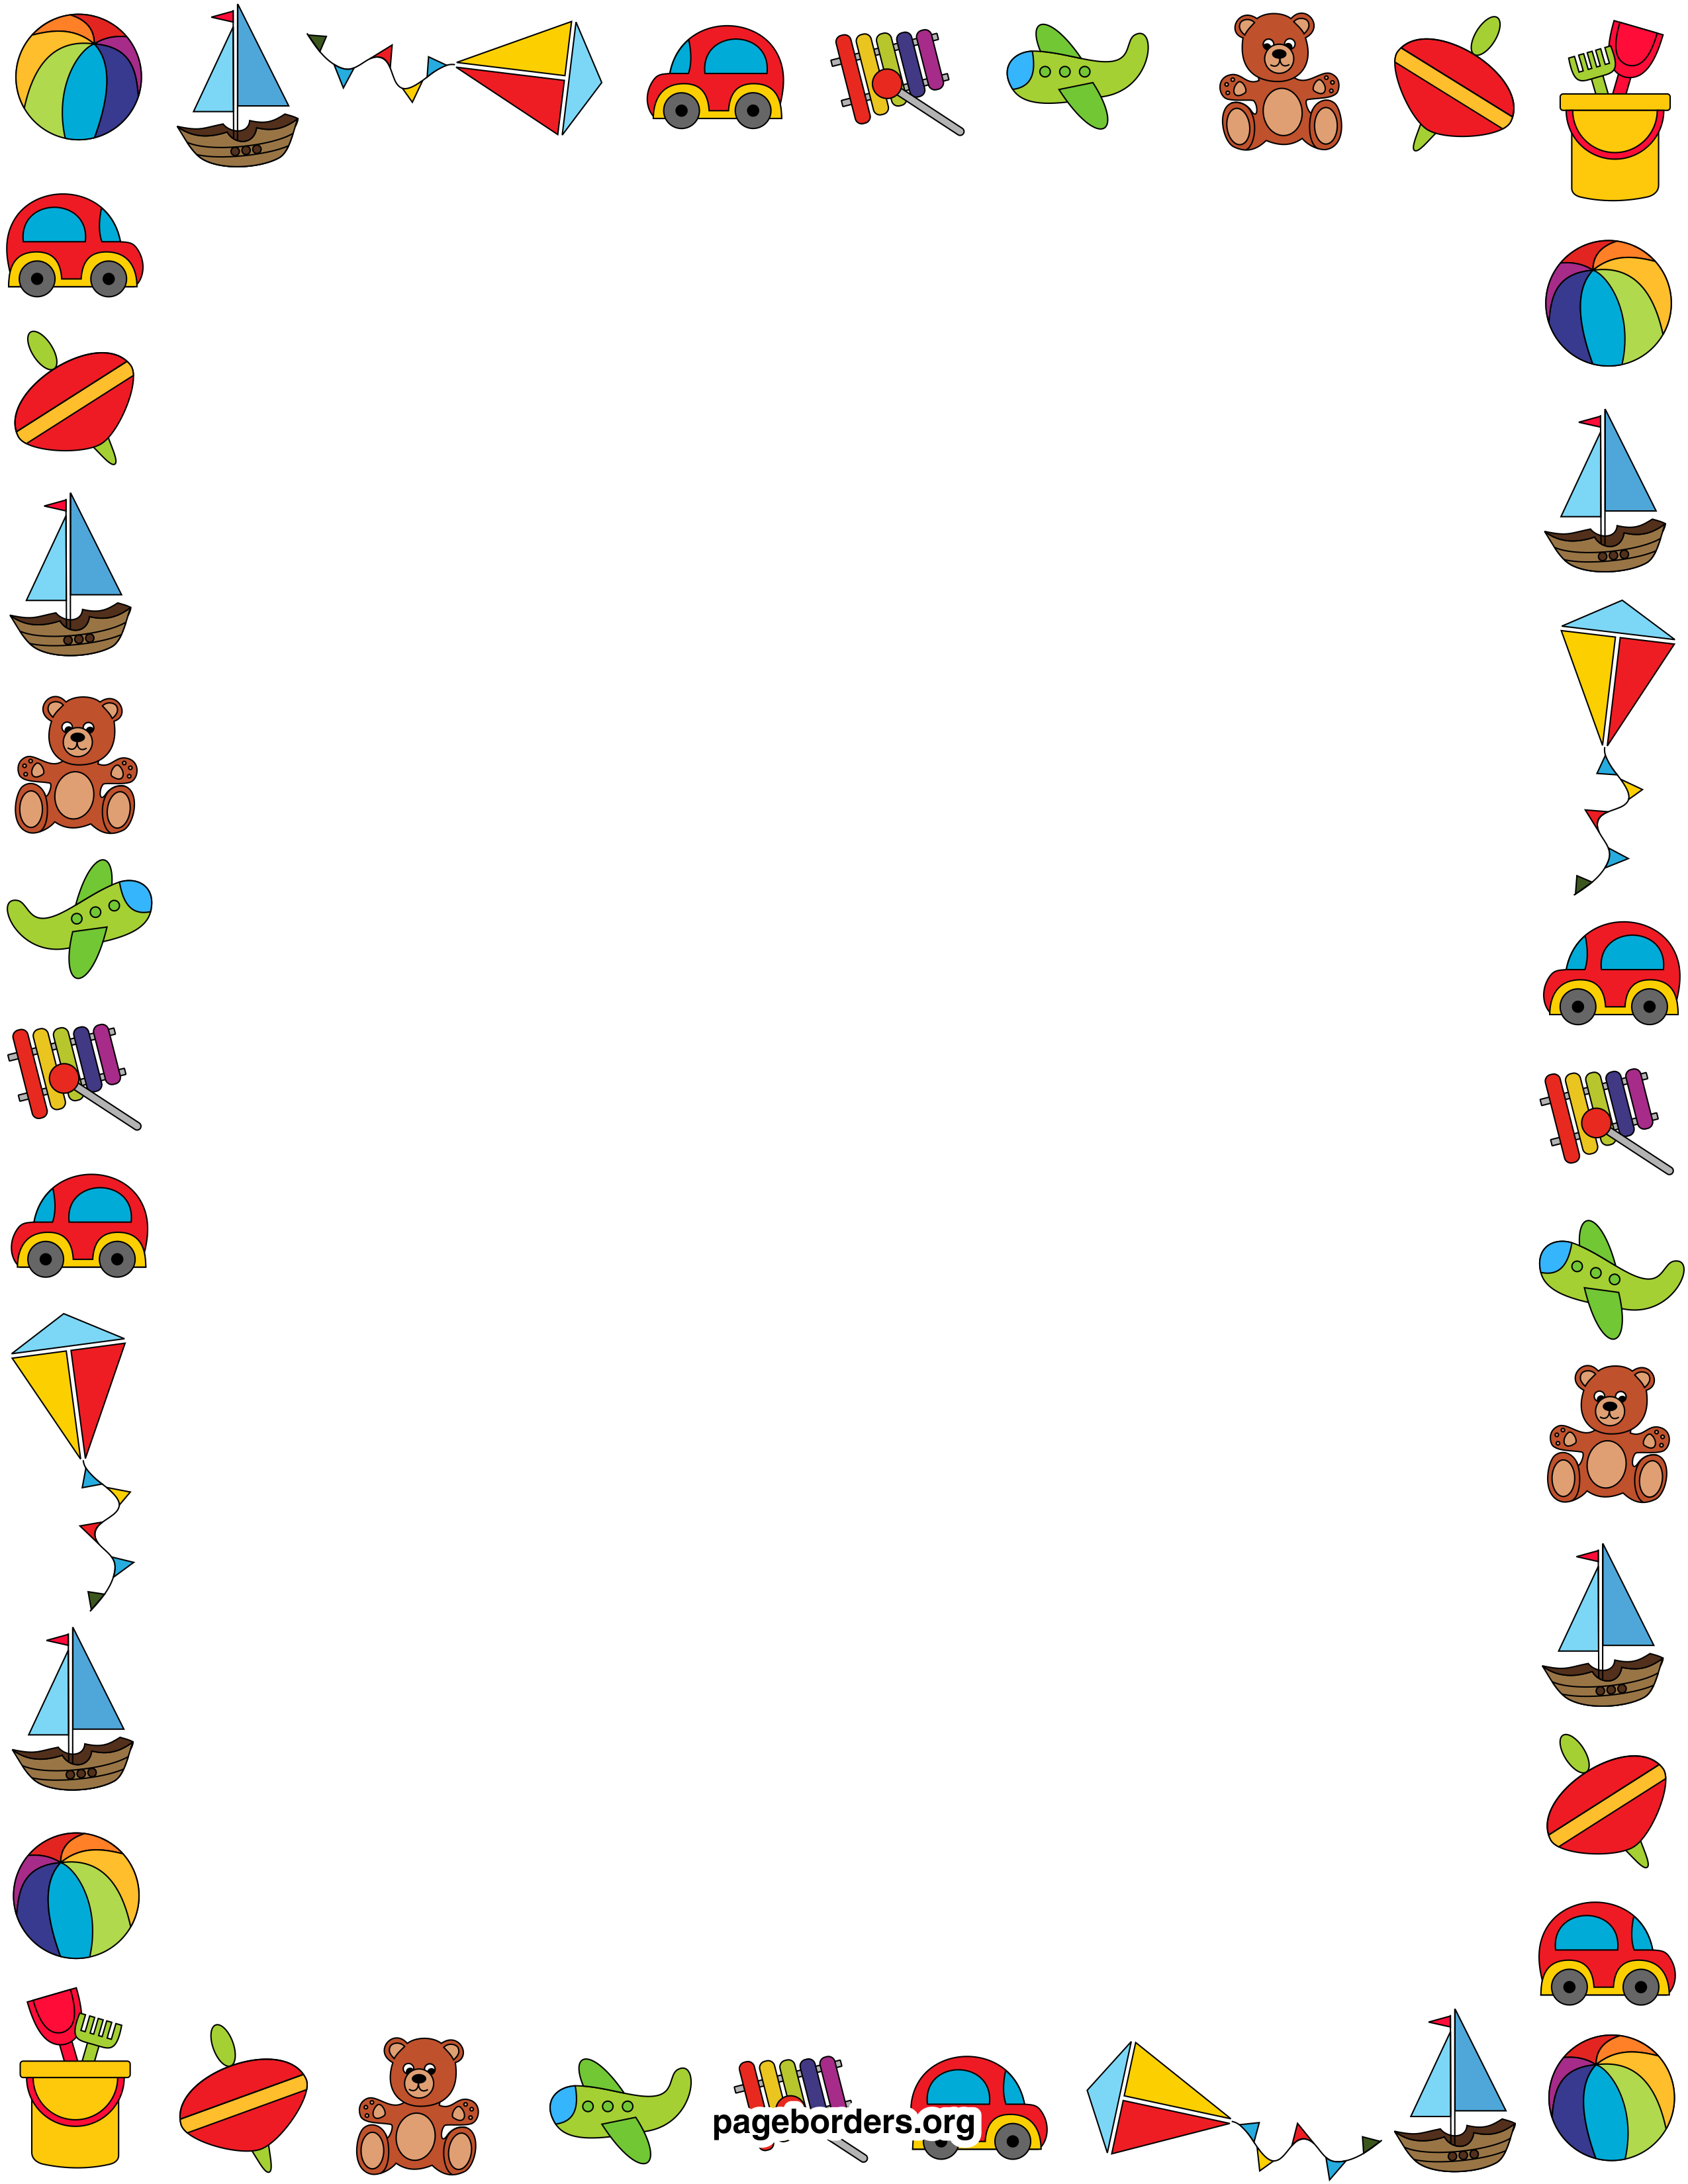 free-word-toys-cliparts-download-free-word-toys-cliparts-png-images